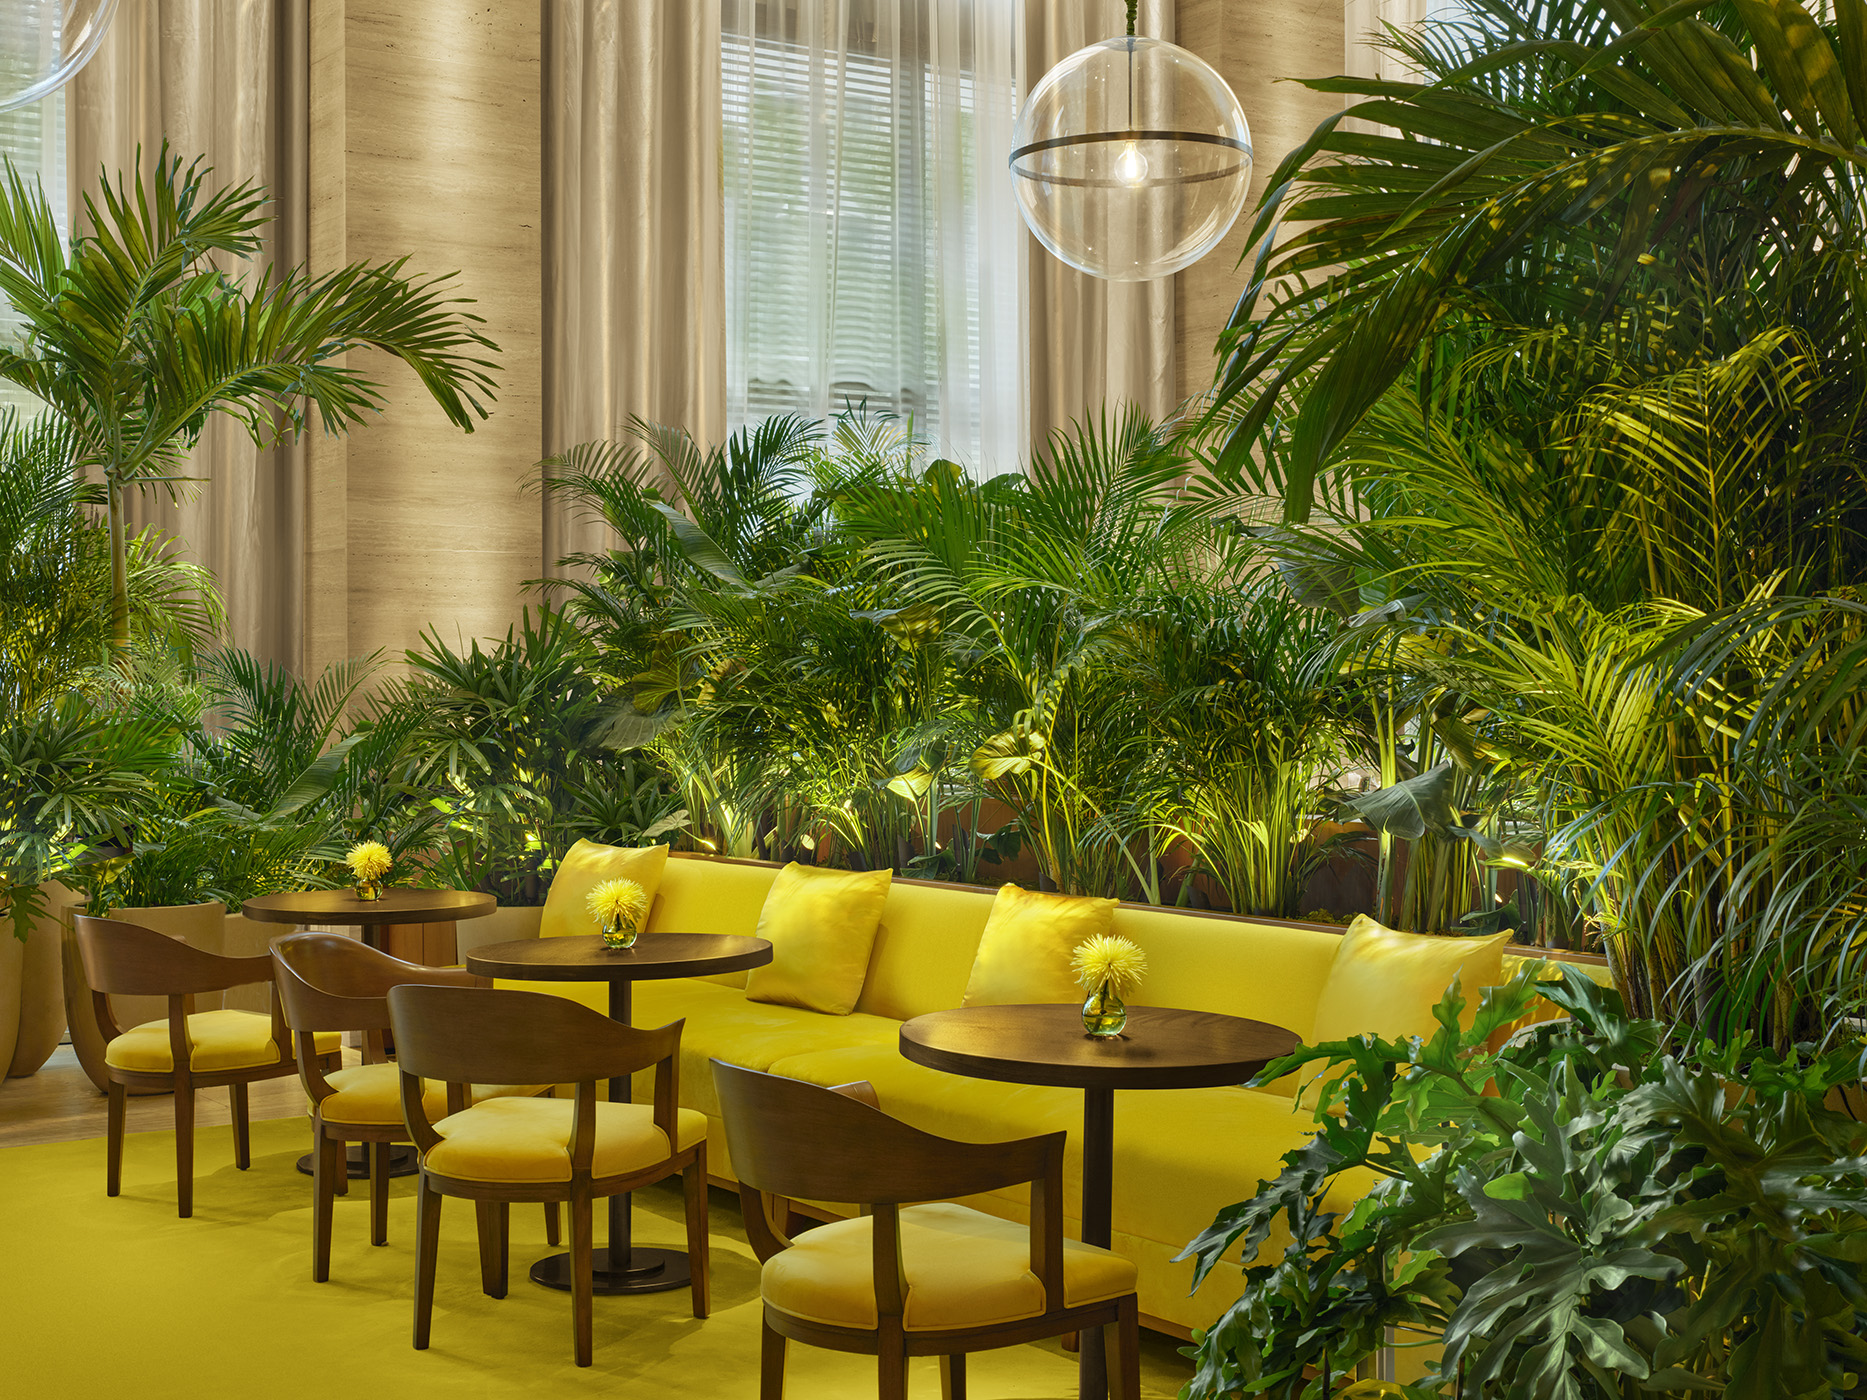 Bright yellow banquet seating surrounded by tropical palms